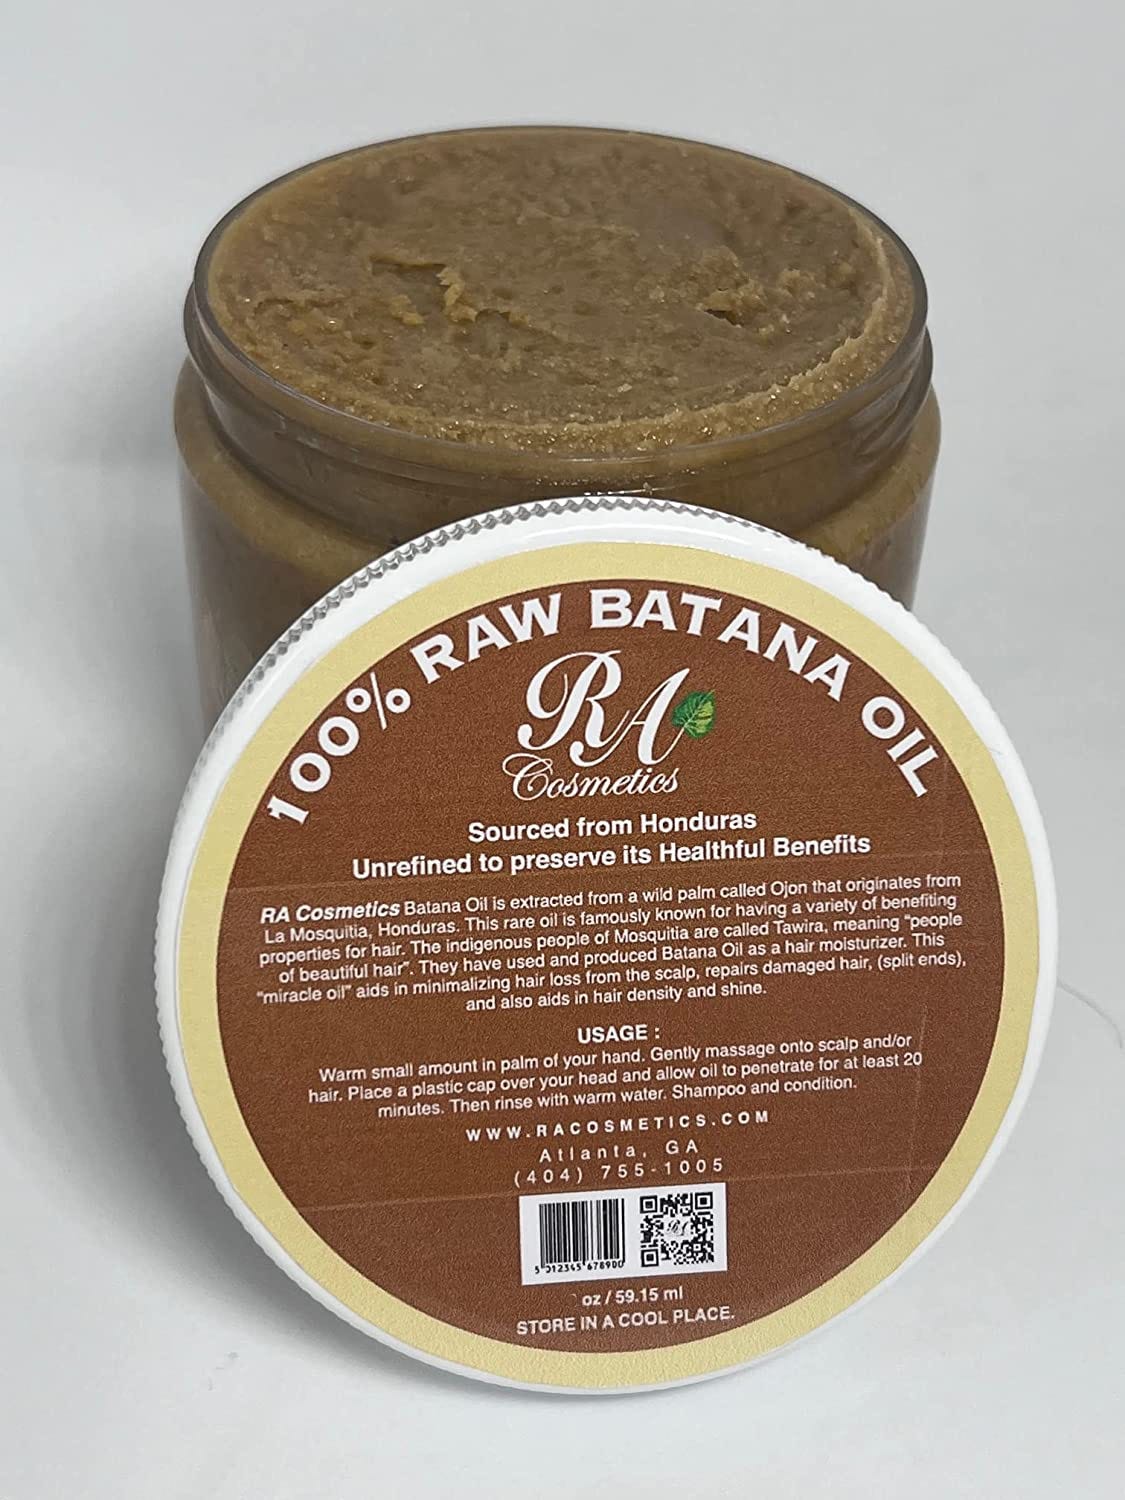 Batana Oil: The Ultimate Beauty Elixir for Luscious Hair and Radiant Skin”, by Review Maven